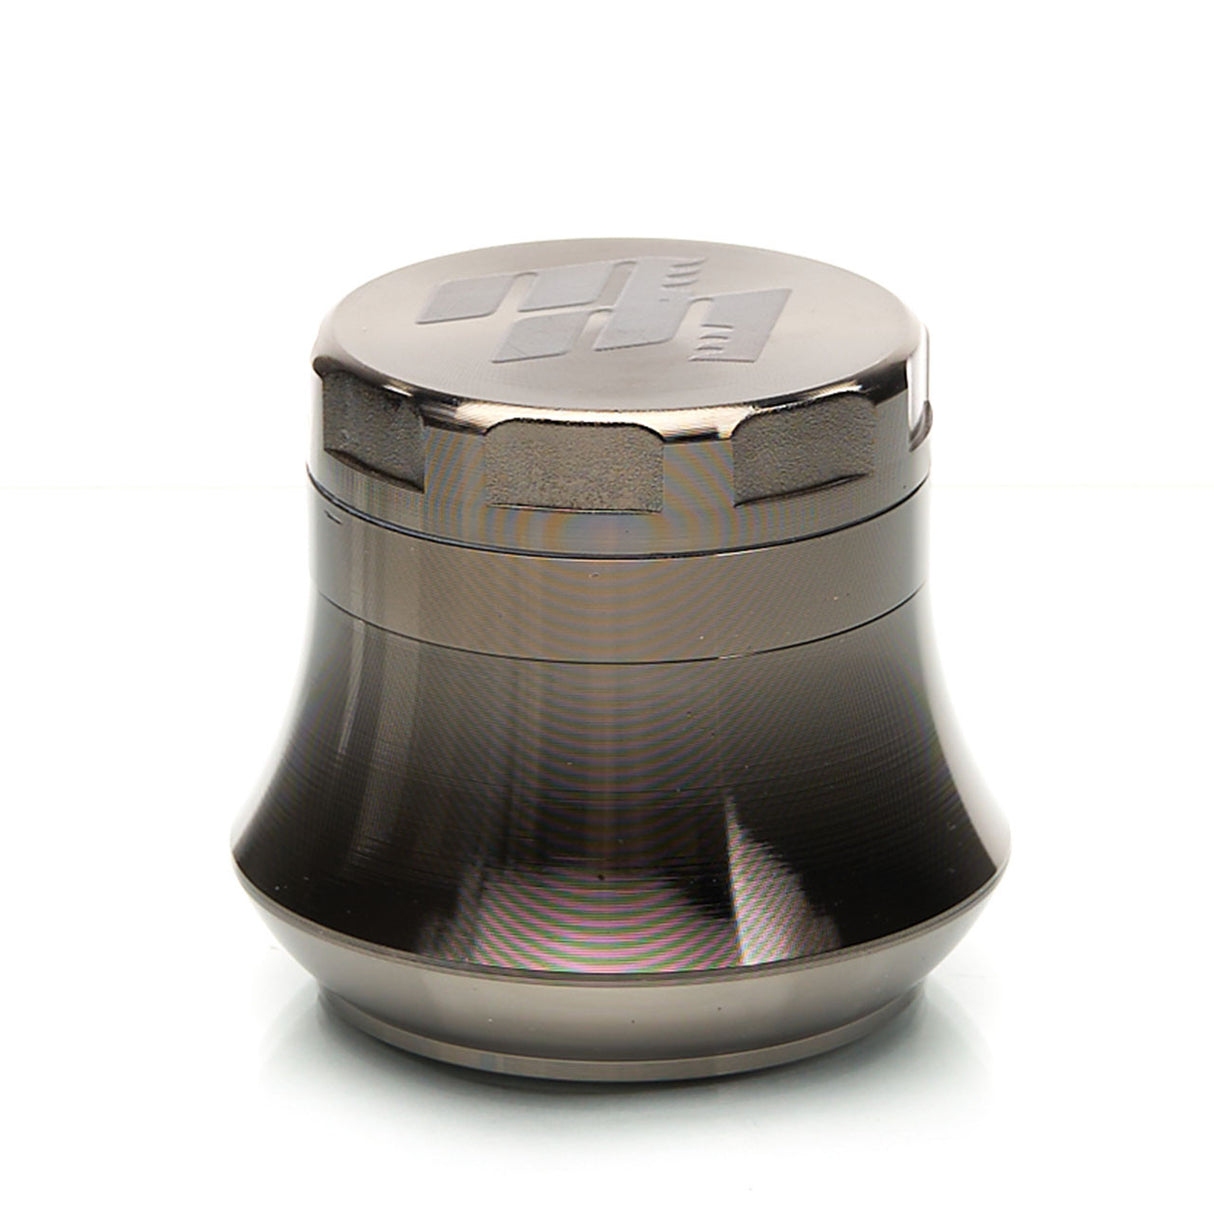 MOB Mulcher UFO 4-piece herb grinder with stainless steel screen and scraper. Comes in black, rose, black and rose gold, and rose gold and black